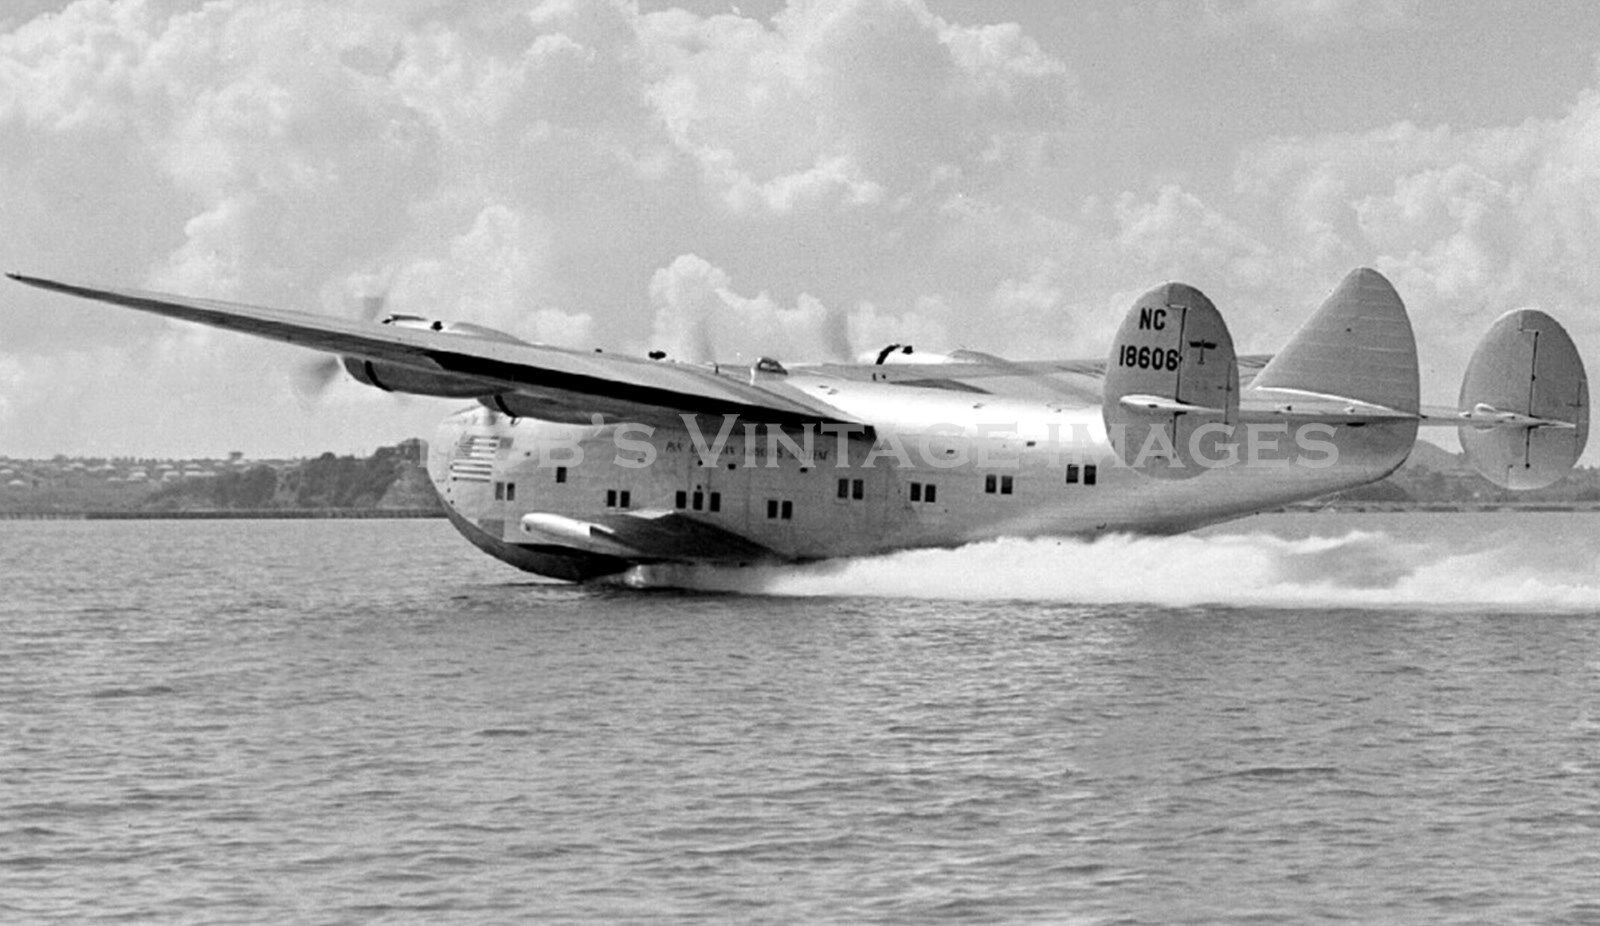  Pan Am Clipper photo B-314 Airplane 18608  Flying Boat  